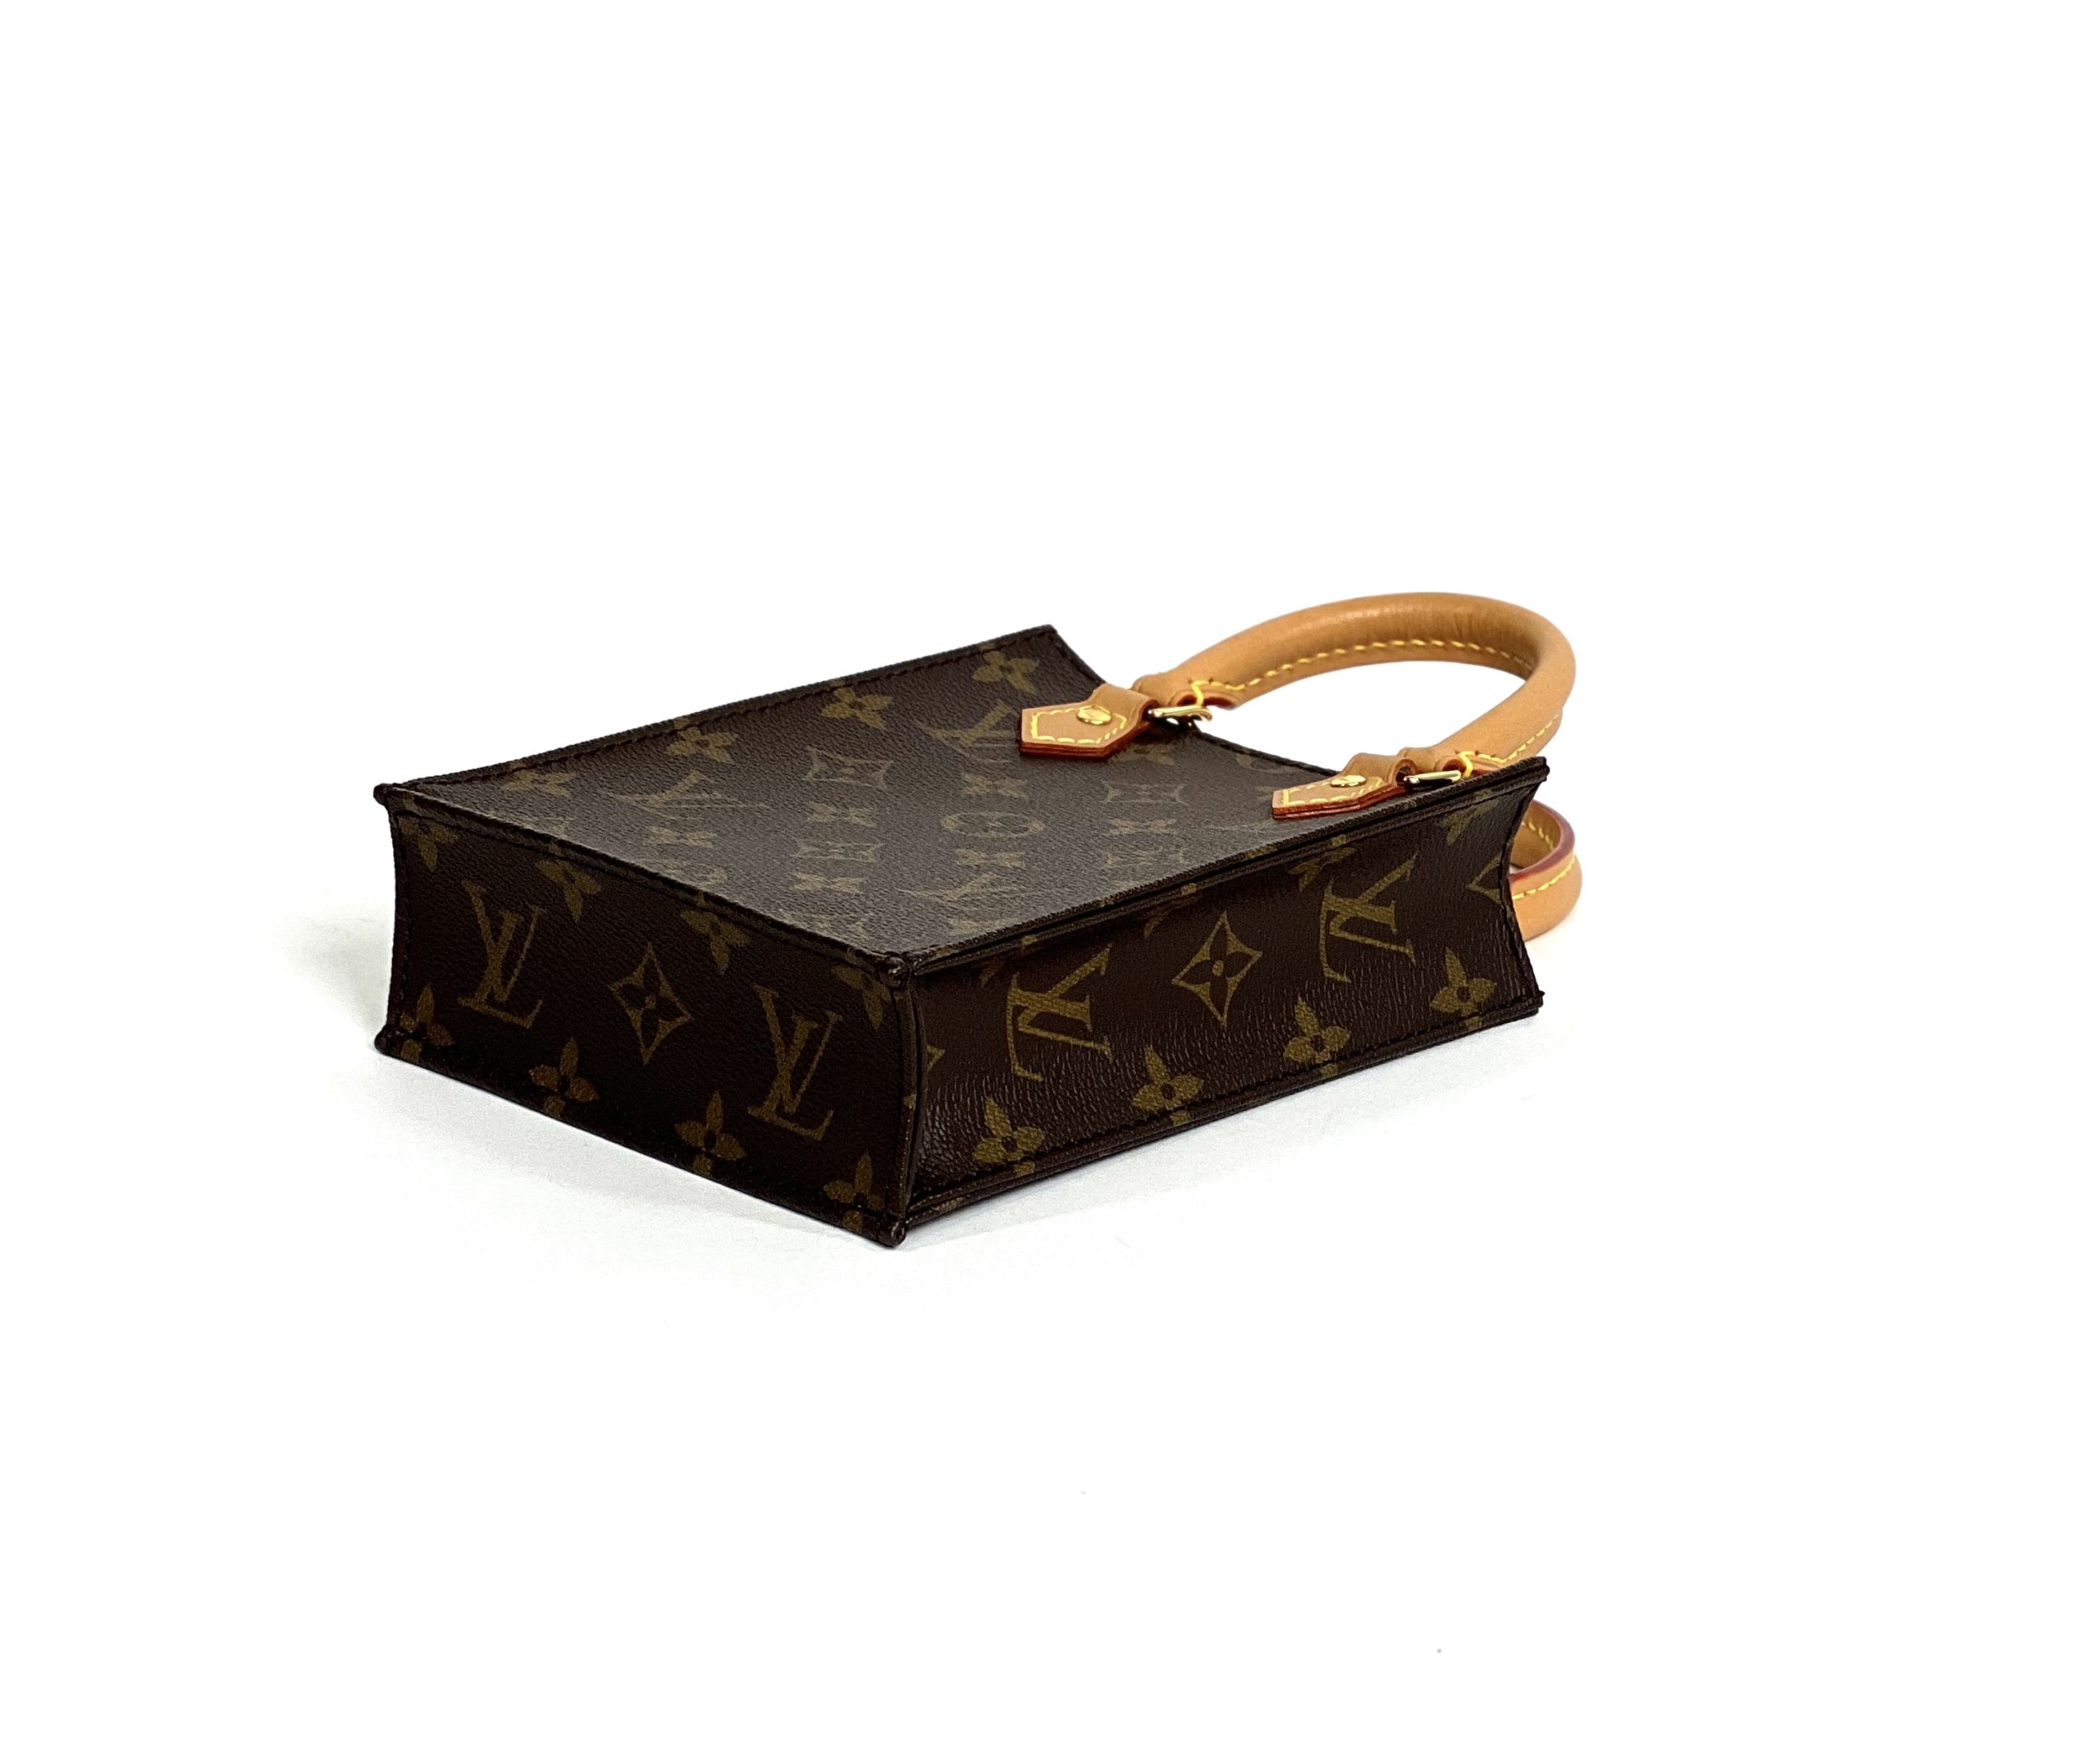 Petit Sac Plat Monogram Empreinte Leather - Wallets and Small Leather Goods